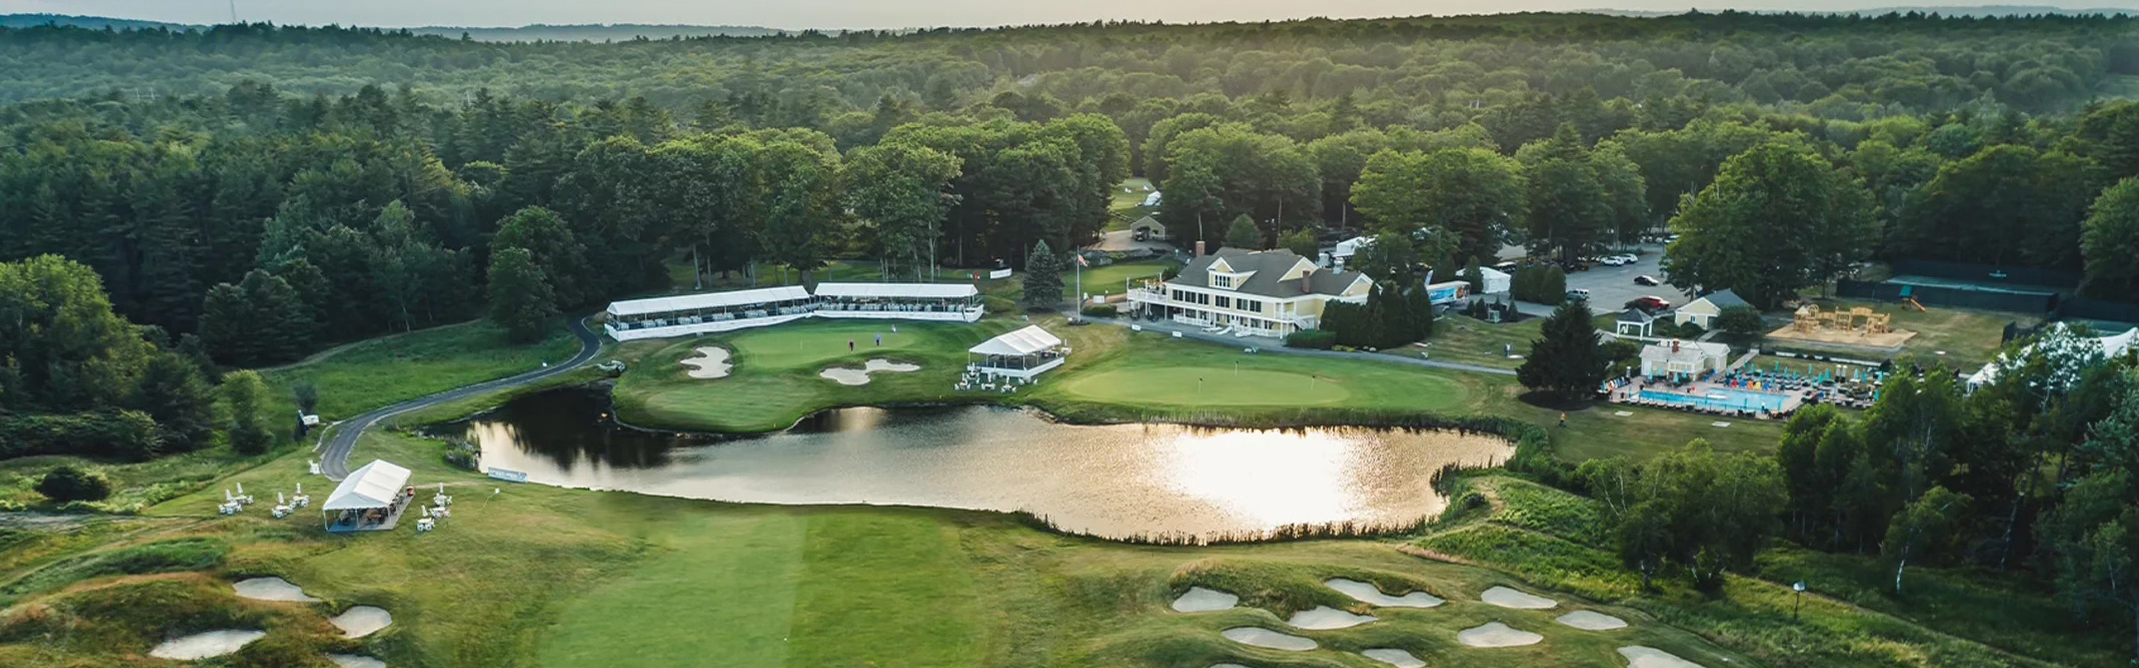 Falmouth Country Club image